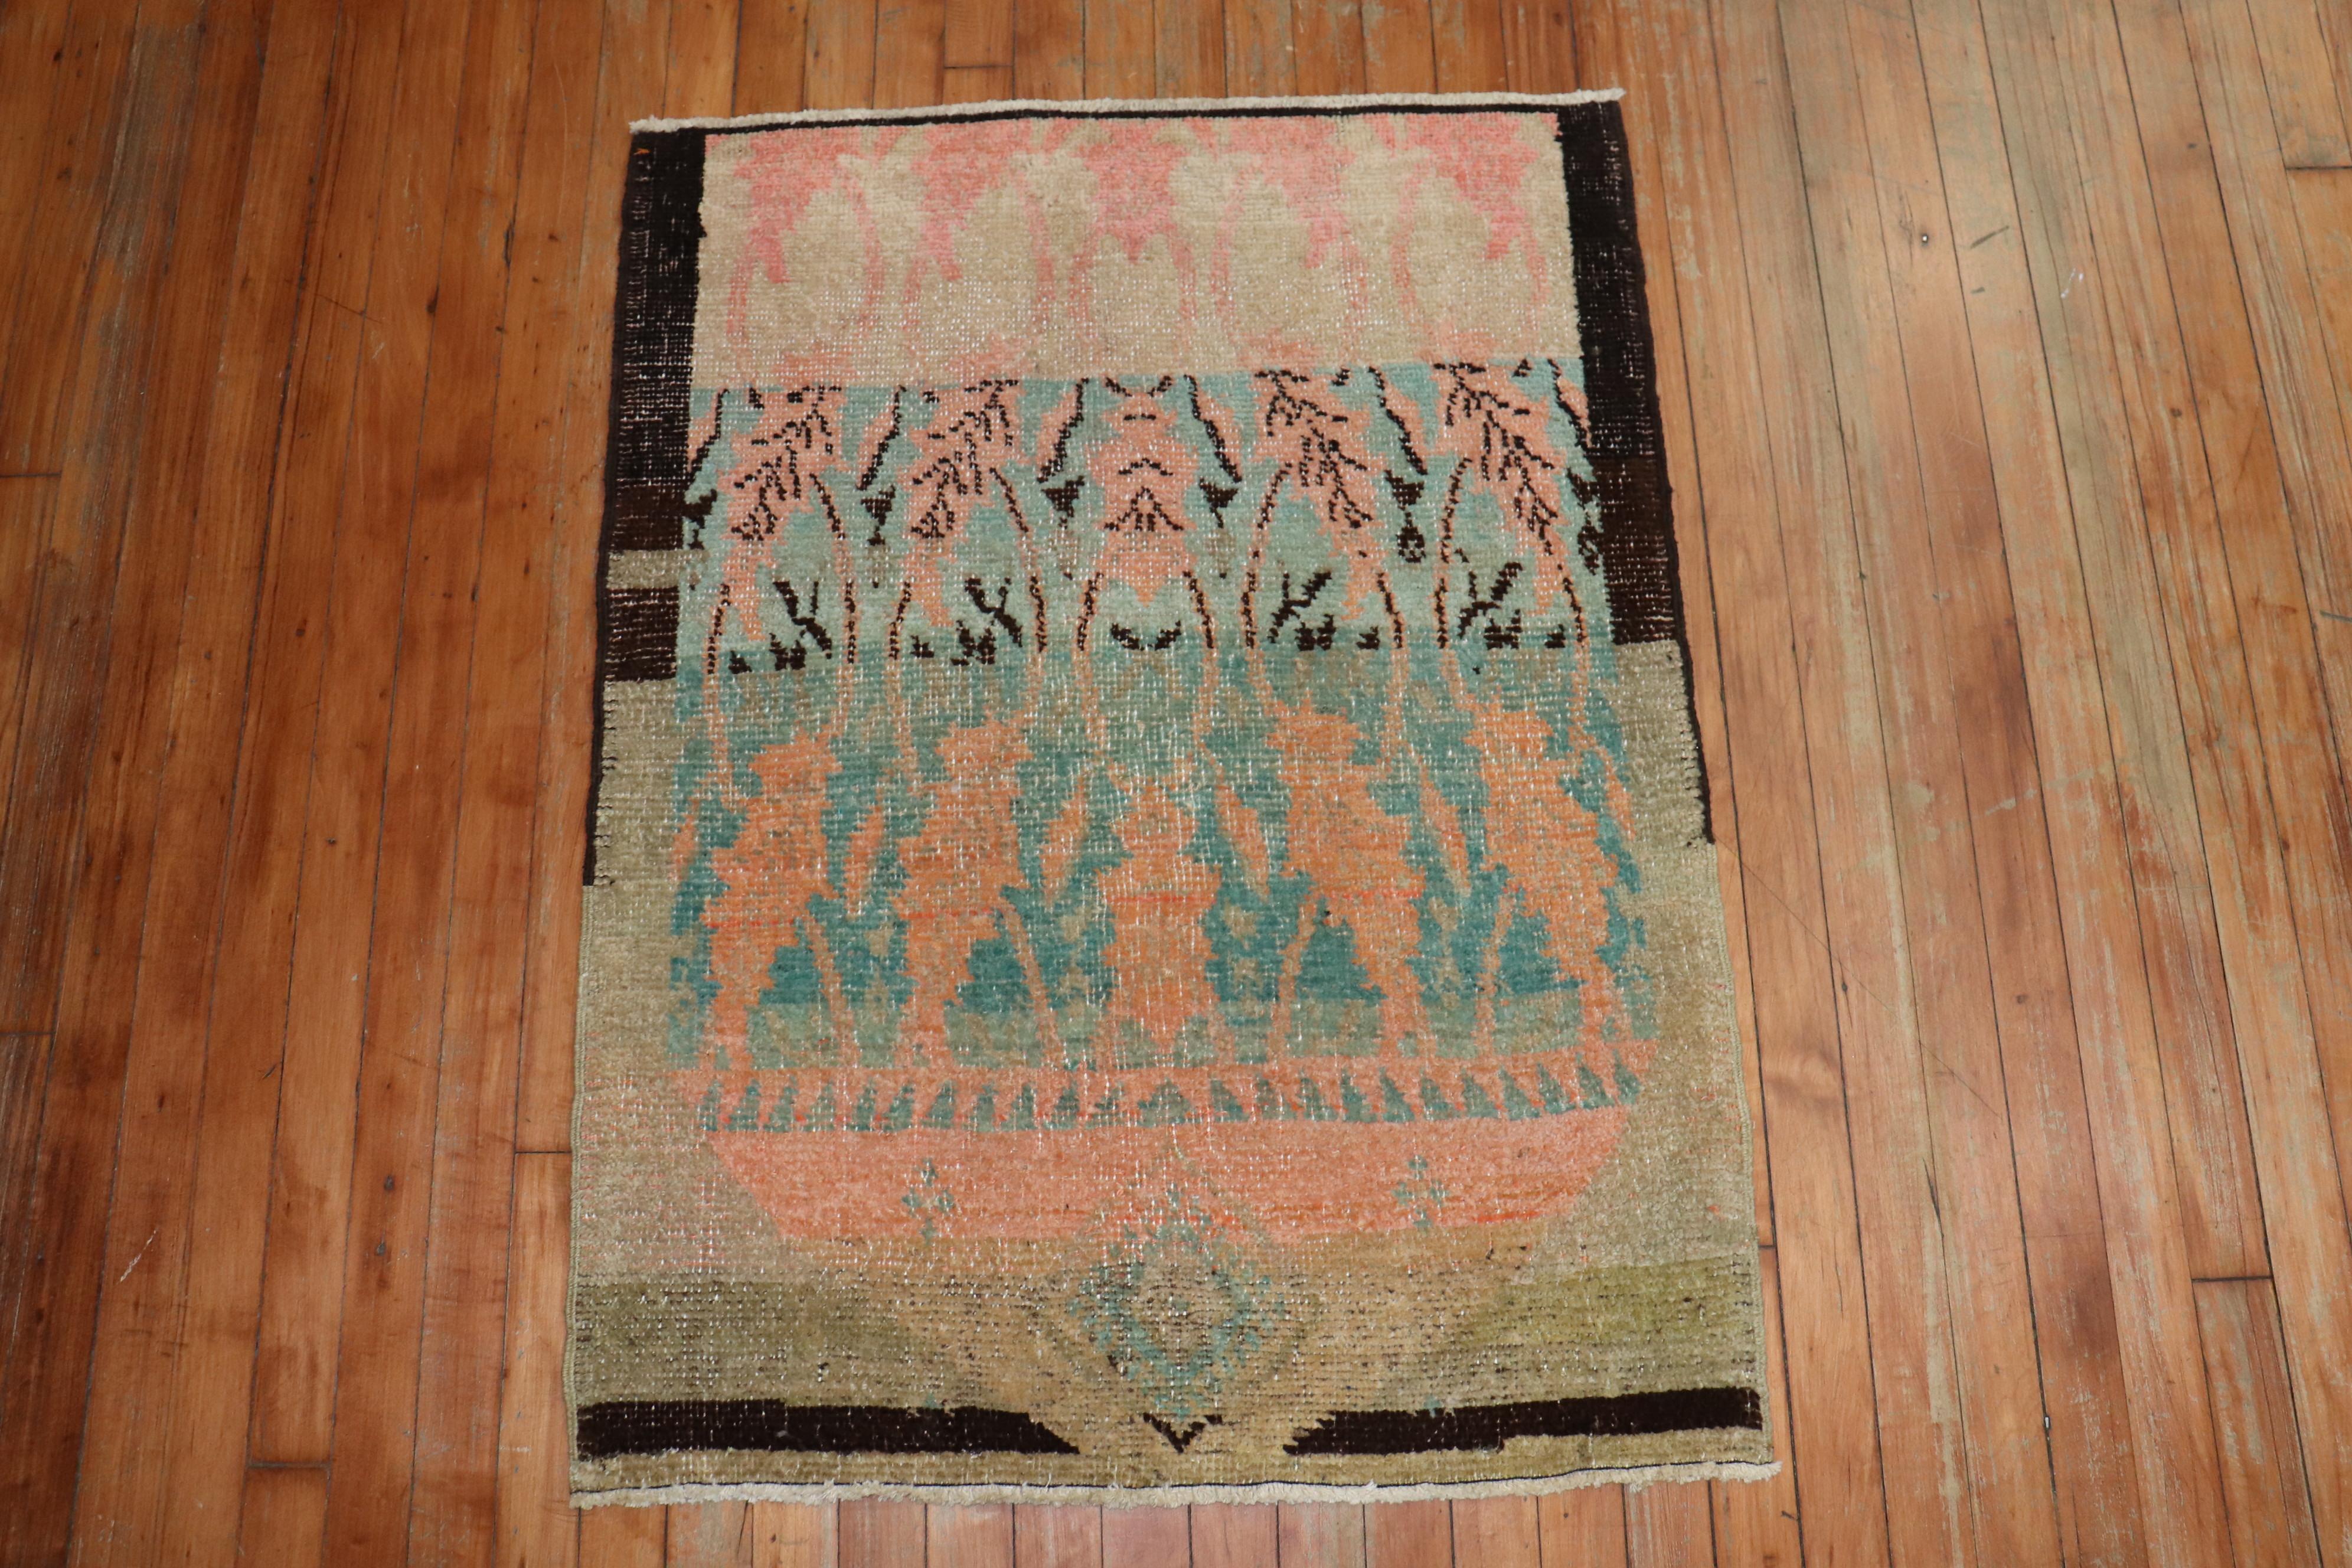 Eclectic Turkish Anatolian rug in peach, green, beige brown accents,

circa mid-20th century, measures: 2'8